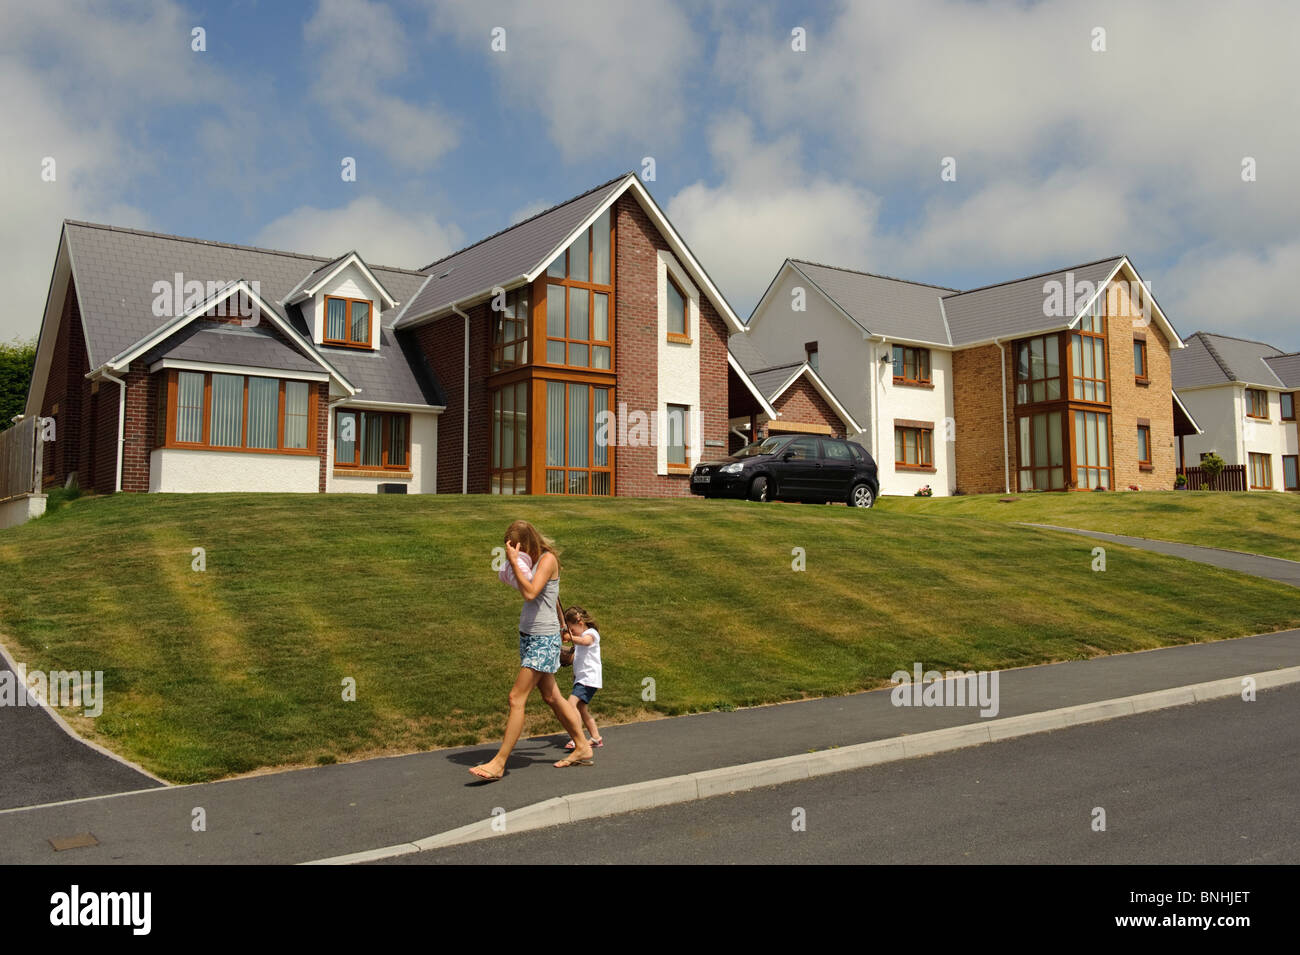 Detached executive homes on a private housing estate, Aberystwyth Wales UK Stock Photo